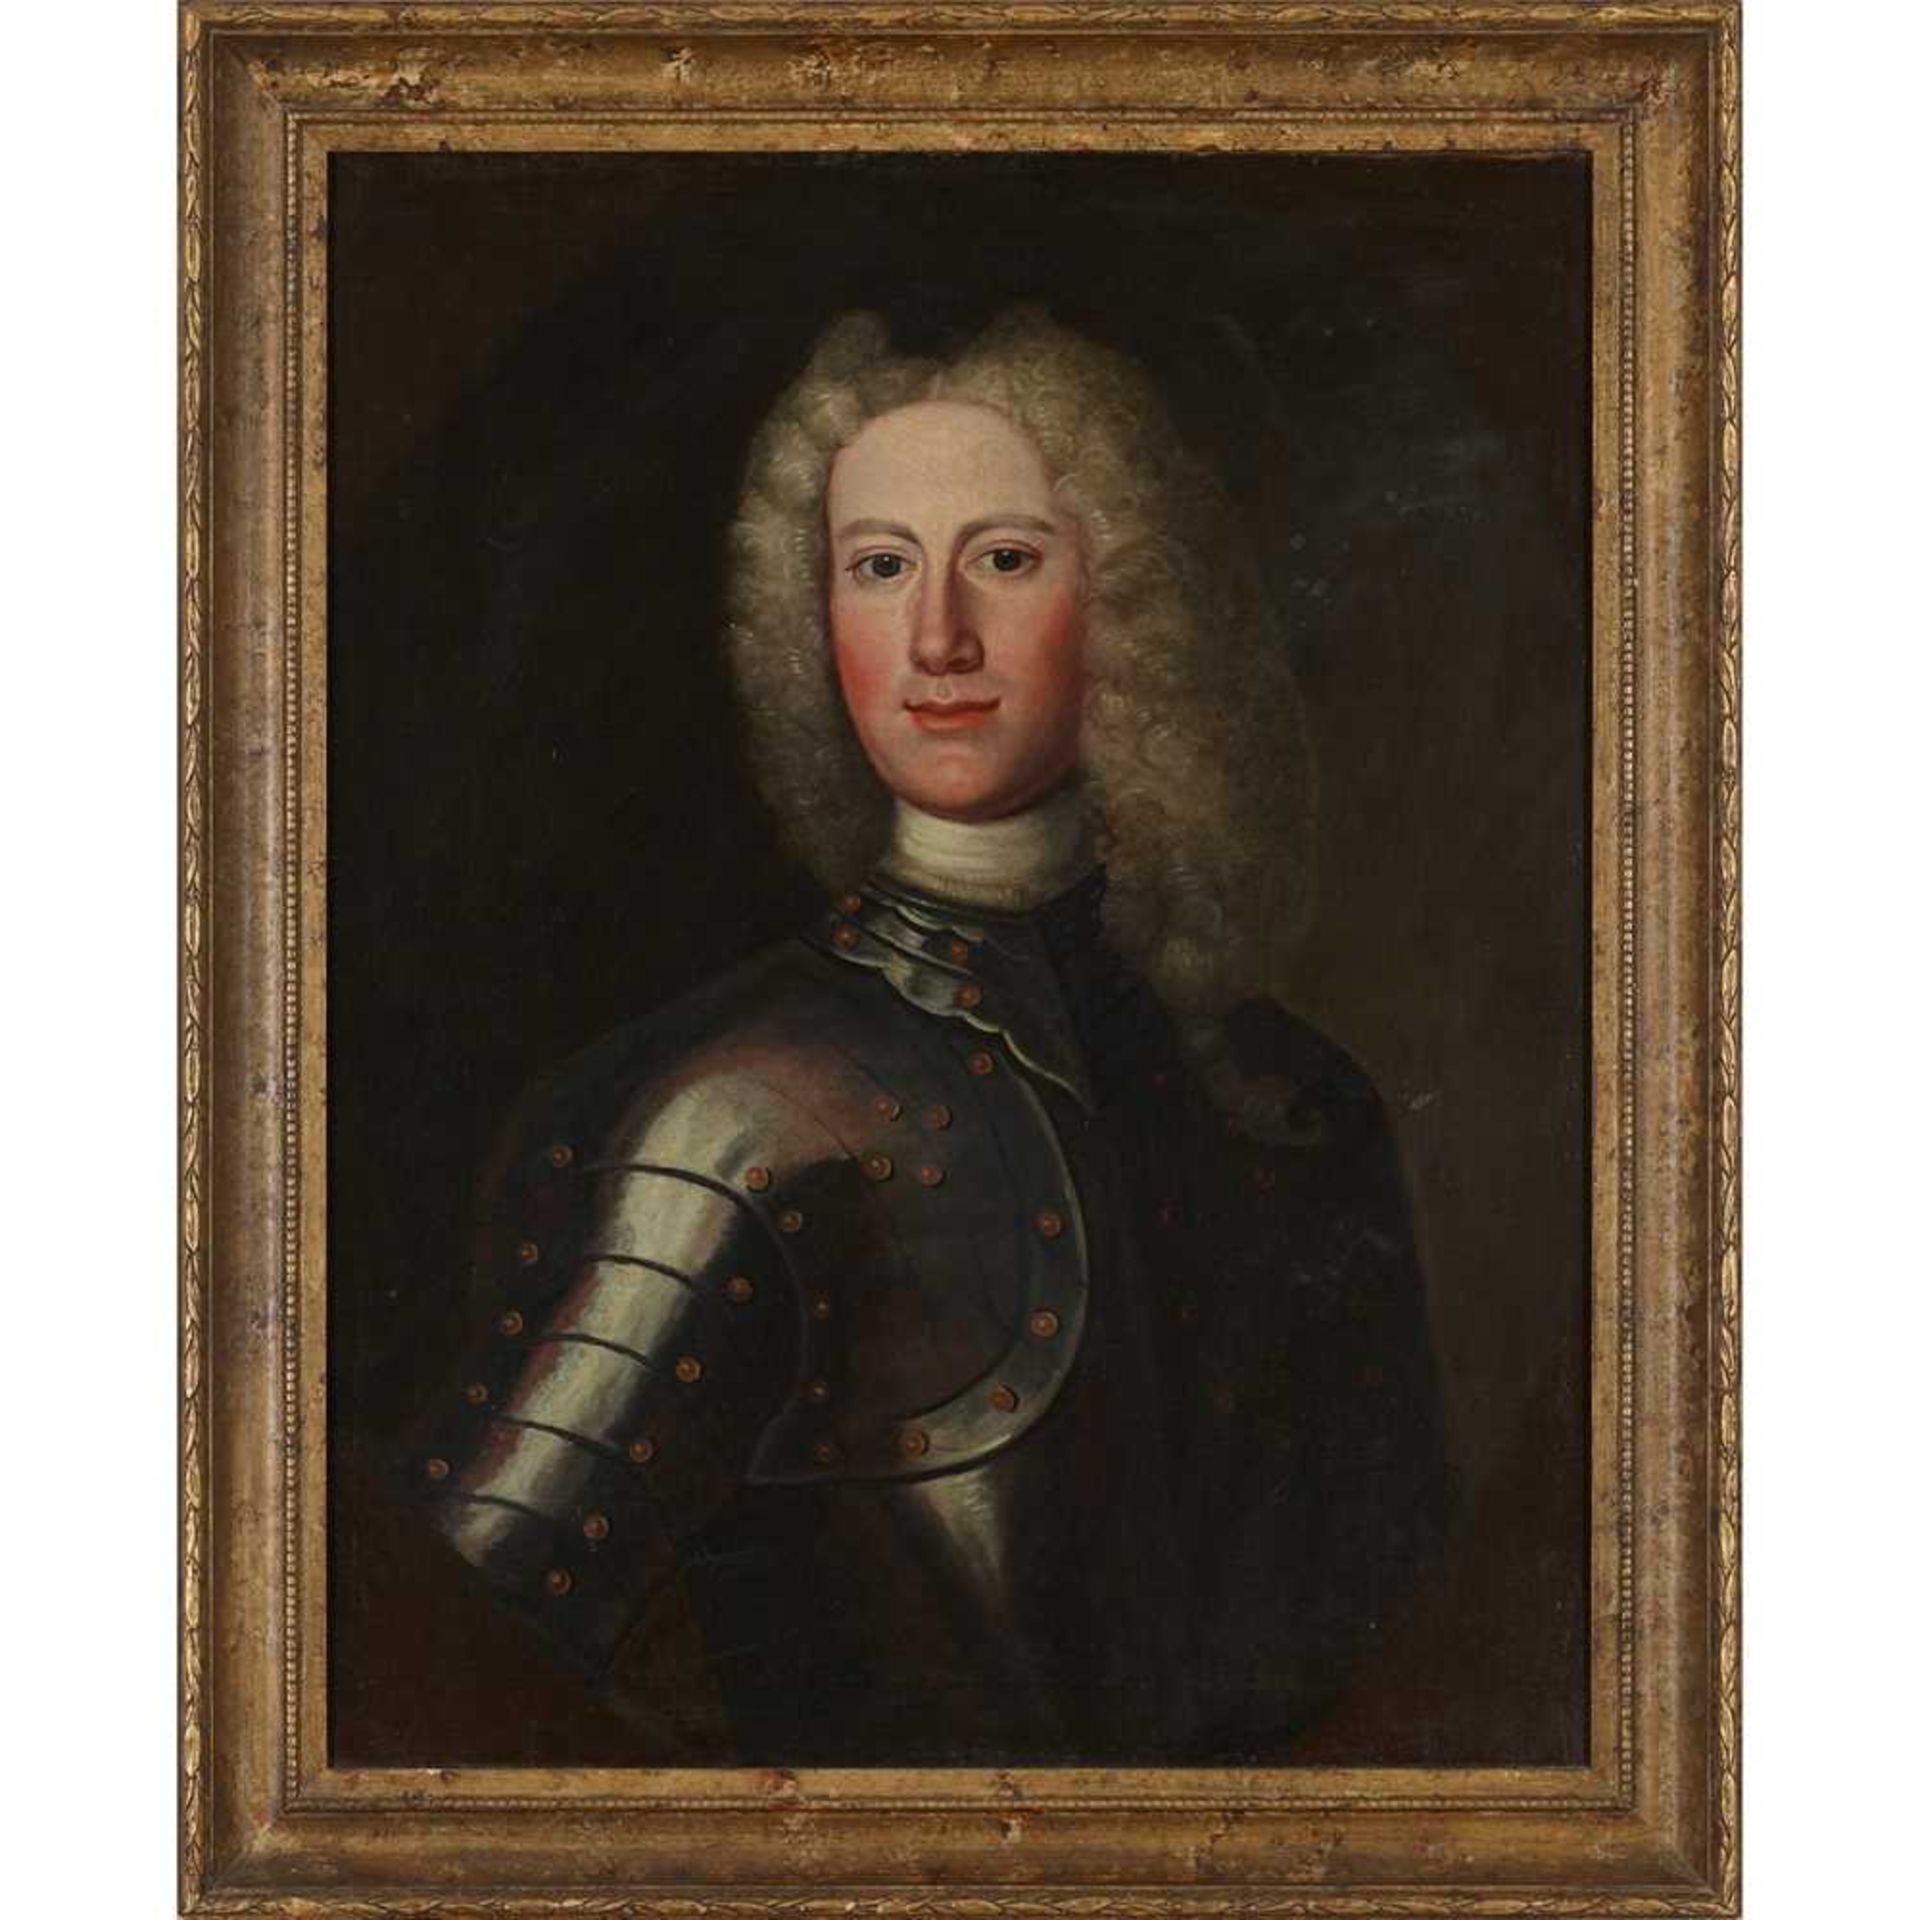 18TH CENTURY SCOTTISH SCHOOL PORTRAIT OF A YOUNG MAN IN ARMOUR - Image 2 of 3